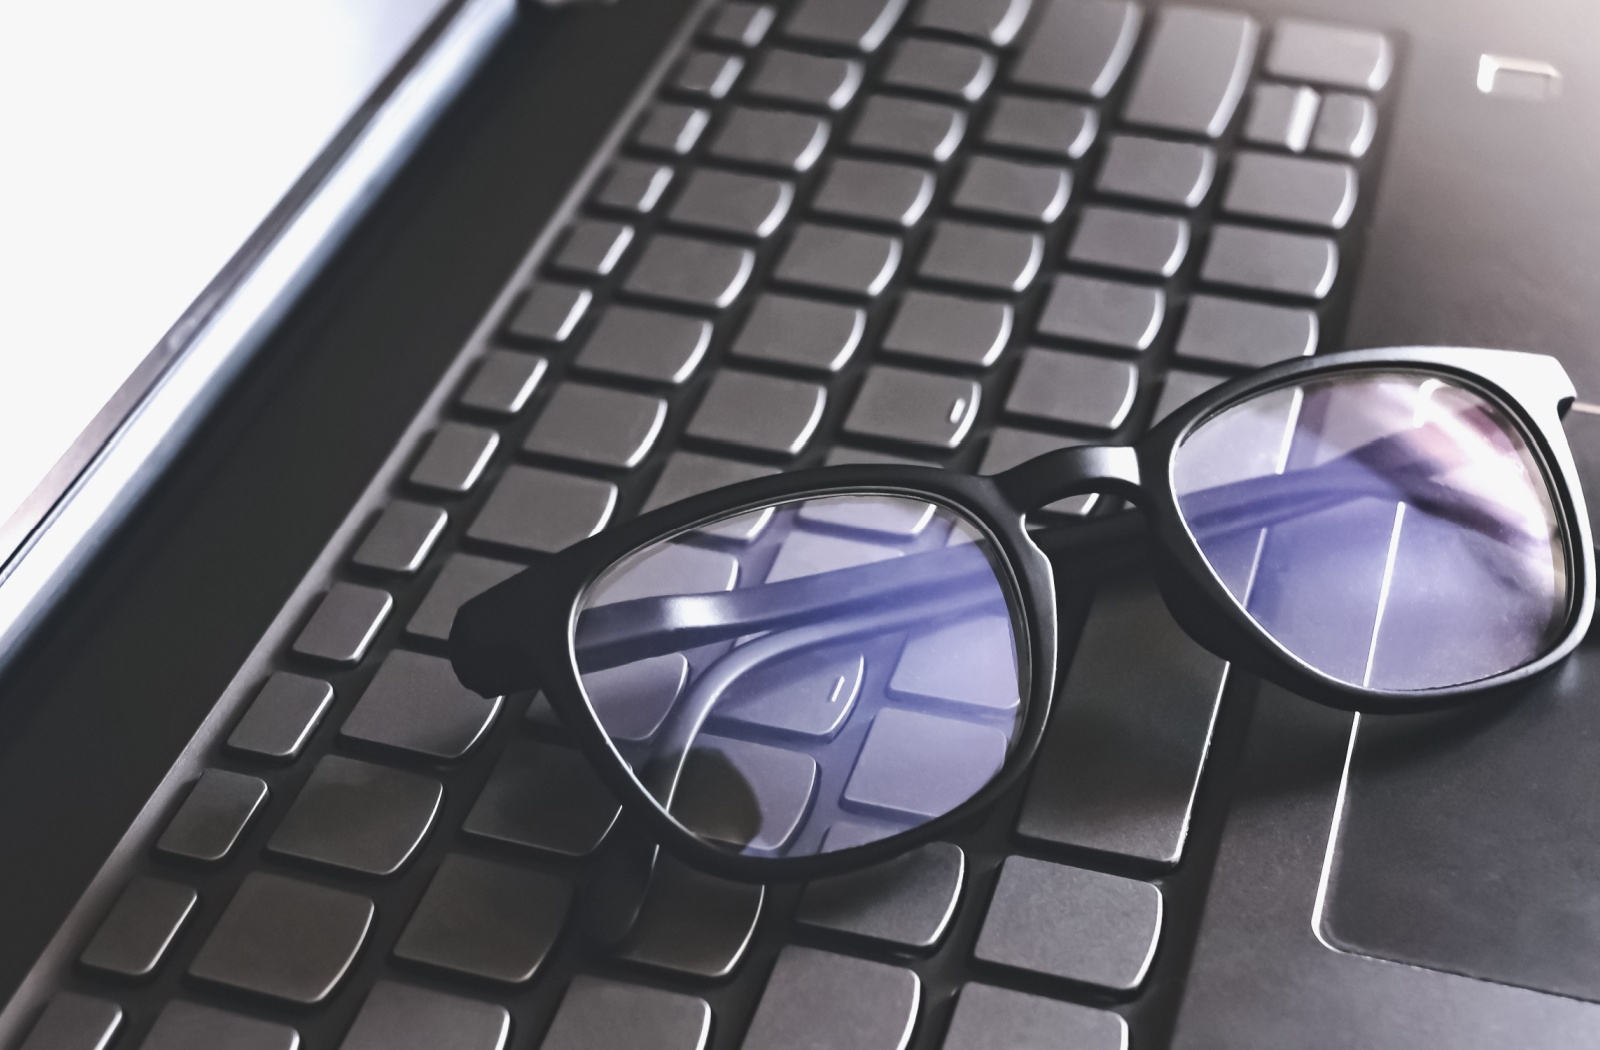 A pair of blue light blocking glasses are balanced on a laptop keyboard.